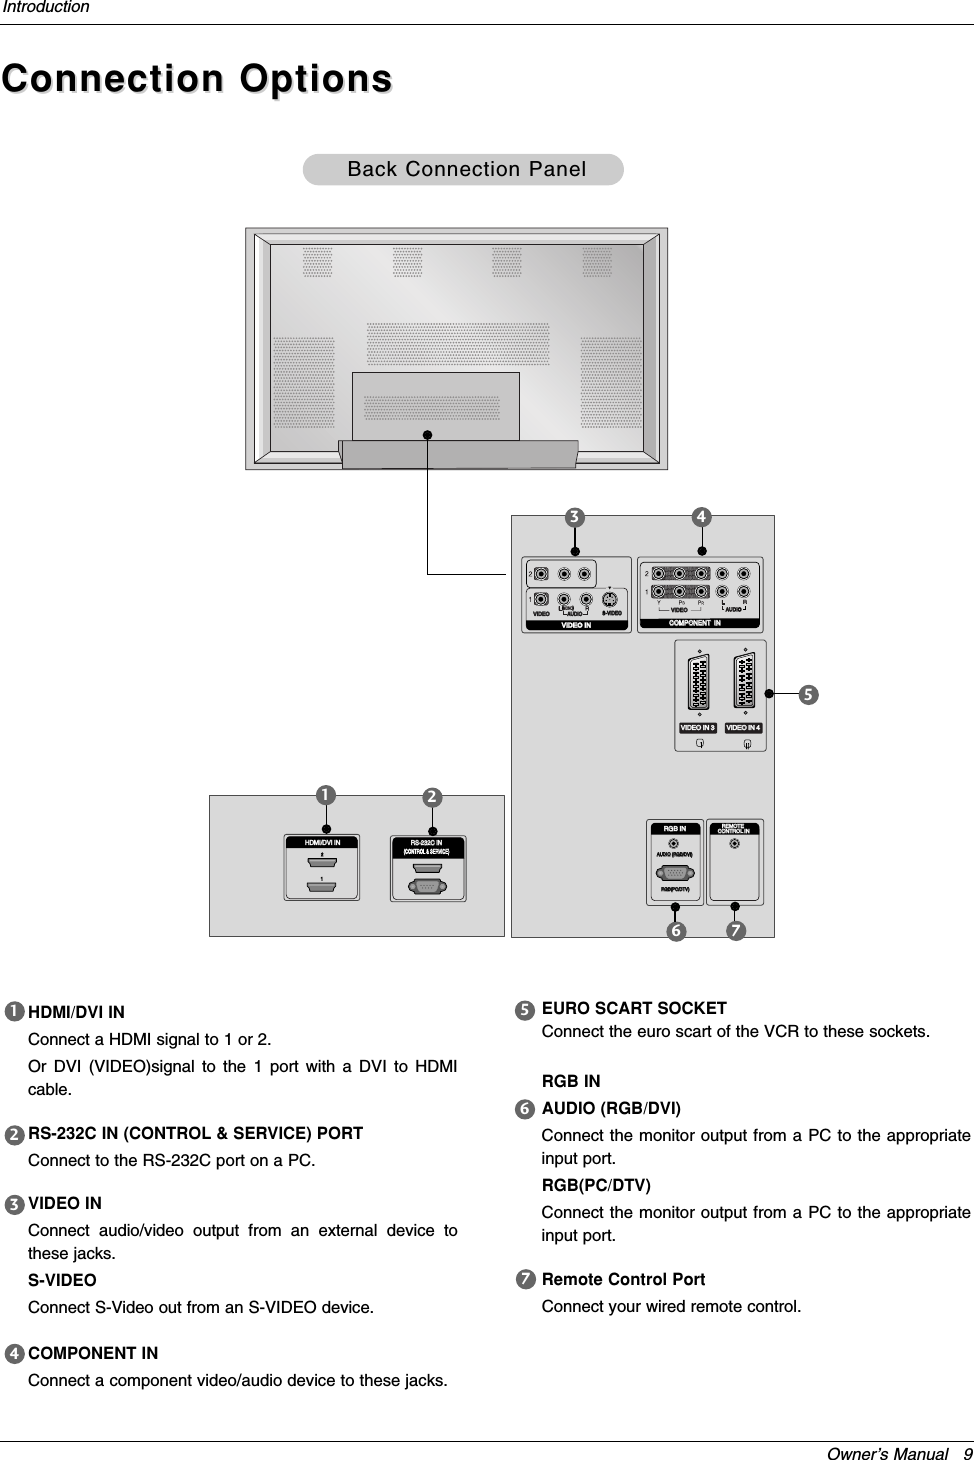 Owner’s Manual   9IntroductionConnection OptionsConnection OptionsDIGITAL AUDIO OUTOPTICALHDMI/DVI IN HDMI/DVI IN 12RS-232C INRS-232C IN(CONTROL &amp; SERVICE)VIDEOVIDEOAUDIOCOMPONENTCOMPONENT  IN  INVIDEOVIDEOAUDIOAUDIOMONO(            )S-VIDEOS-VIDEOVIDEO INVIDEO IN 3VIDEO IN 3 VIDEO IN 4VIDEO IN 4AUDIO (RGB/DVI)AUDIO (RGB/DVI)RGB INRGB INRGB(PC/DTV)RGB(PC/DTV)REMOTE REMOTE CONTROL INCONTROL INBack Connection PanelBack Connection Panel1625734HDMI/DVI INConnect a HDMI signal to 1 or 2.Or DVI (VIDEO)signal to the 1 port with a DVI to HDMIcable.RS-232C IN (CONTROL &amp; SERVICE) PORTConnect to the RS-232C port on a PC.VIDEO IN Connect audio/video output from an external device tothese jacks.S-VIDEO Connect S-Video out from an S-VIDEO device.COMPONENT INConnect a component video/audio device to these jacks.EURO SCART SOCKETConnect the euro scart of the VCR to these sockets.RGB IN AUDIO (RGB/DVI)Connect the monitor output from a PC to the appropriateinput port.RGB(PC/DTV)Connect the monitor output from a PC to the appropriateinput port.Remote Control PortConnect your wired remote control.1723456